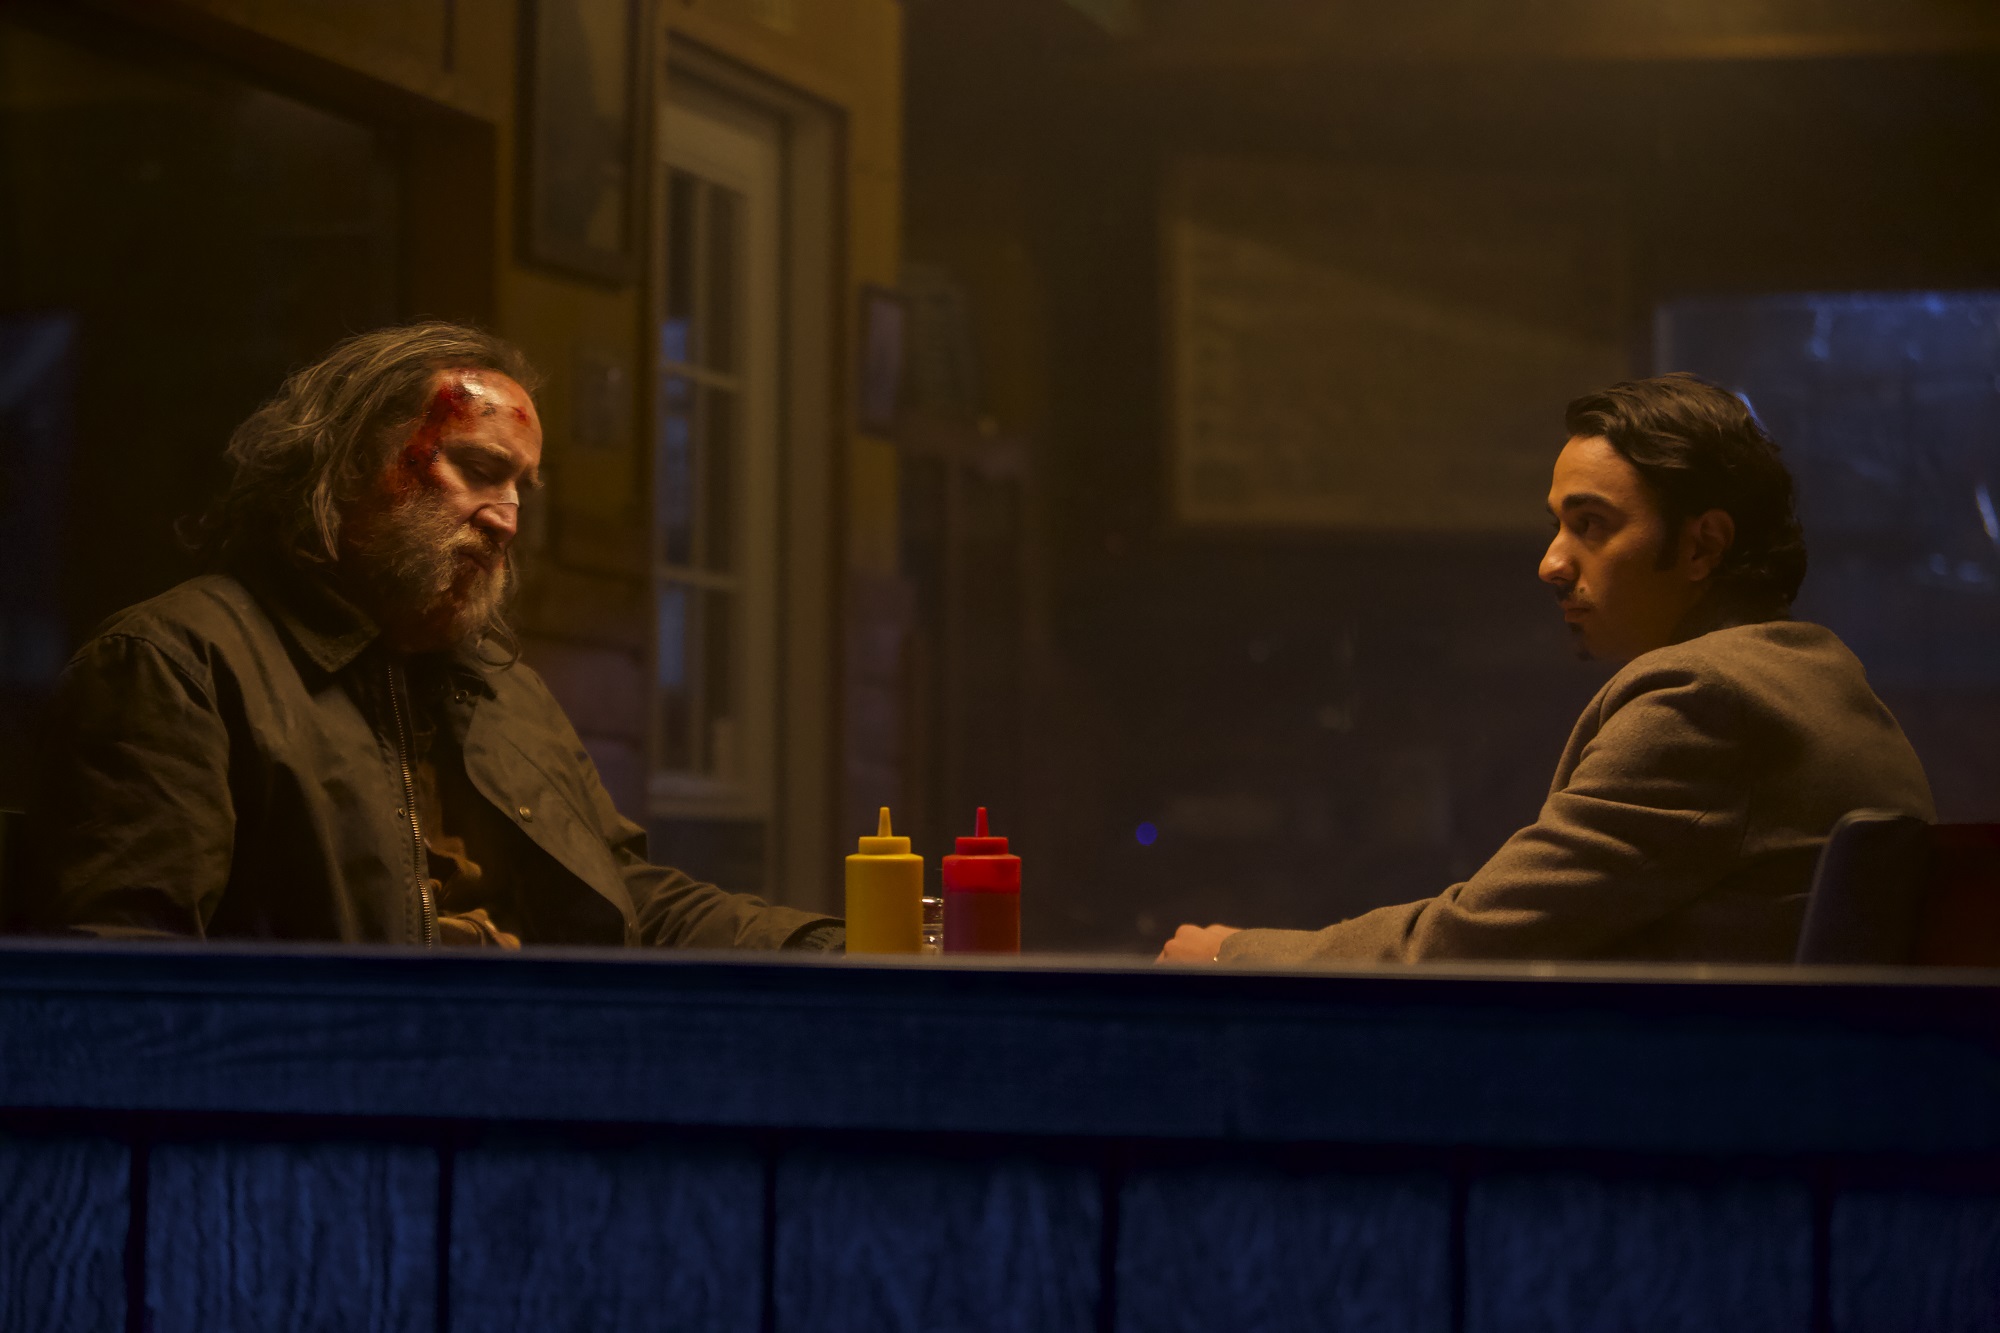 Pig: Nicolas Cage and Alex Wolff sit at a restaurant table